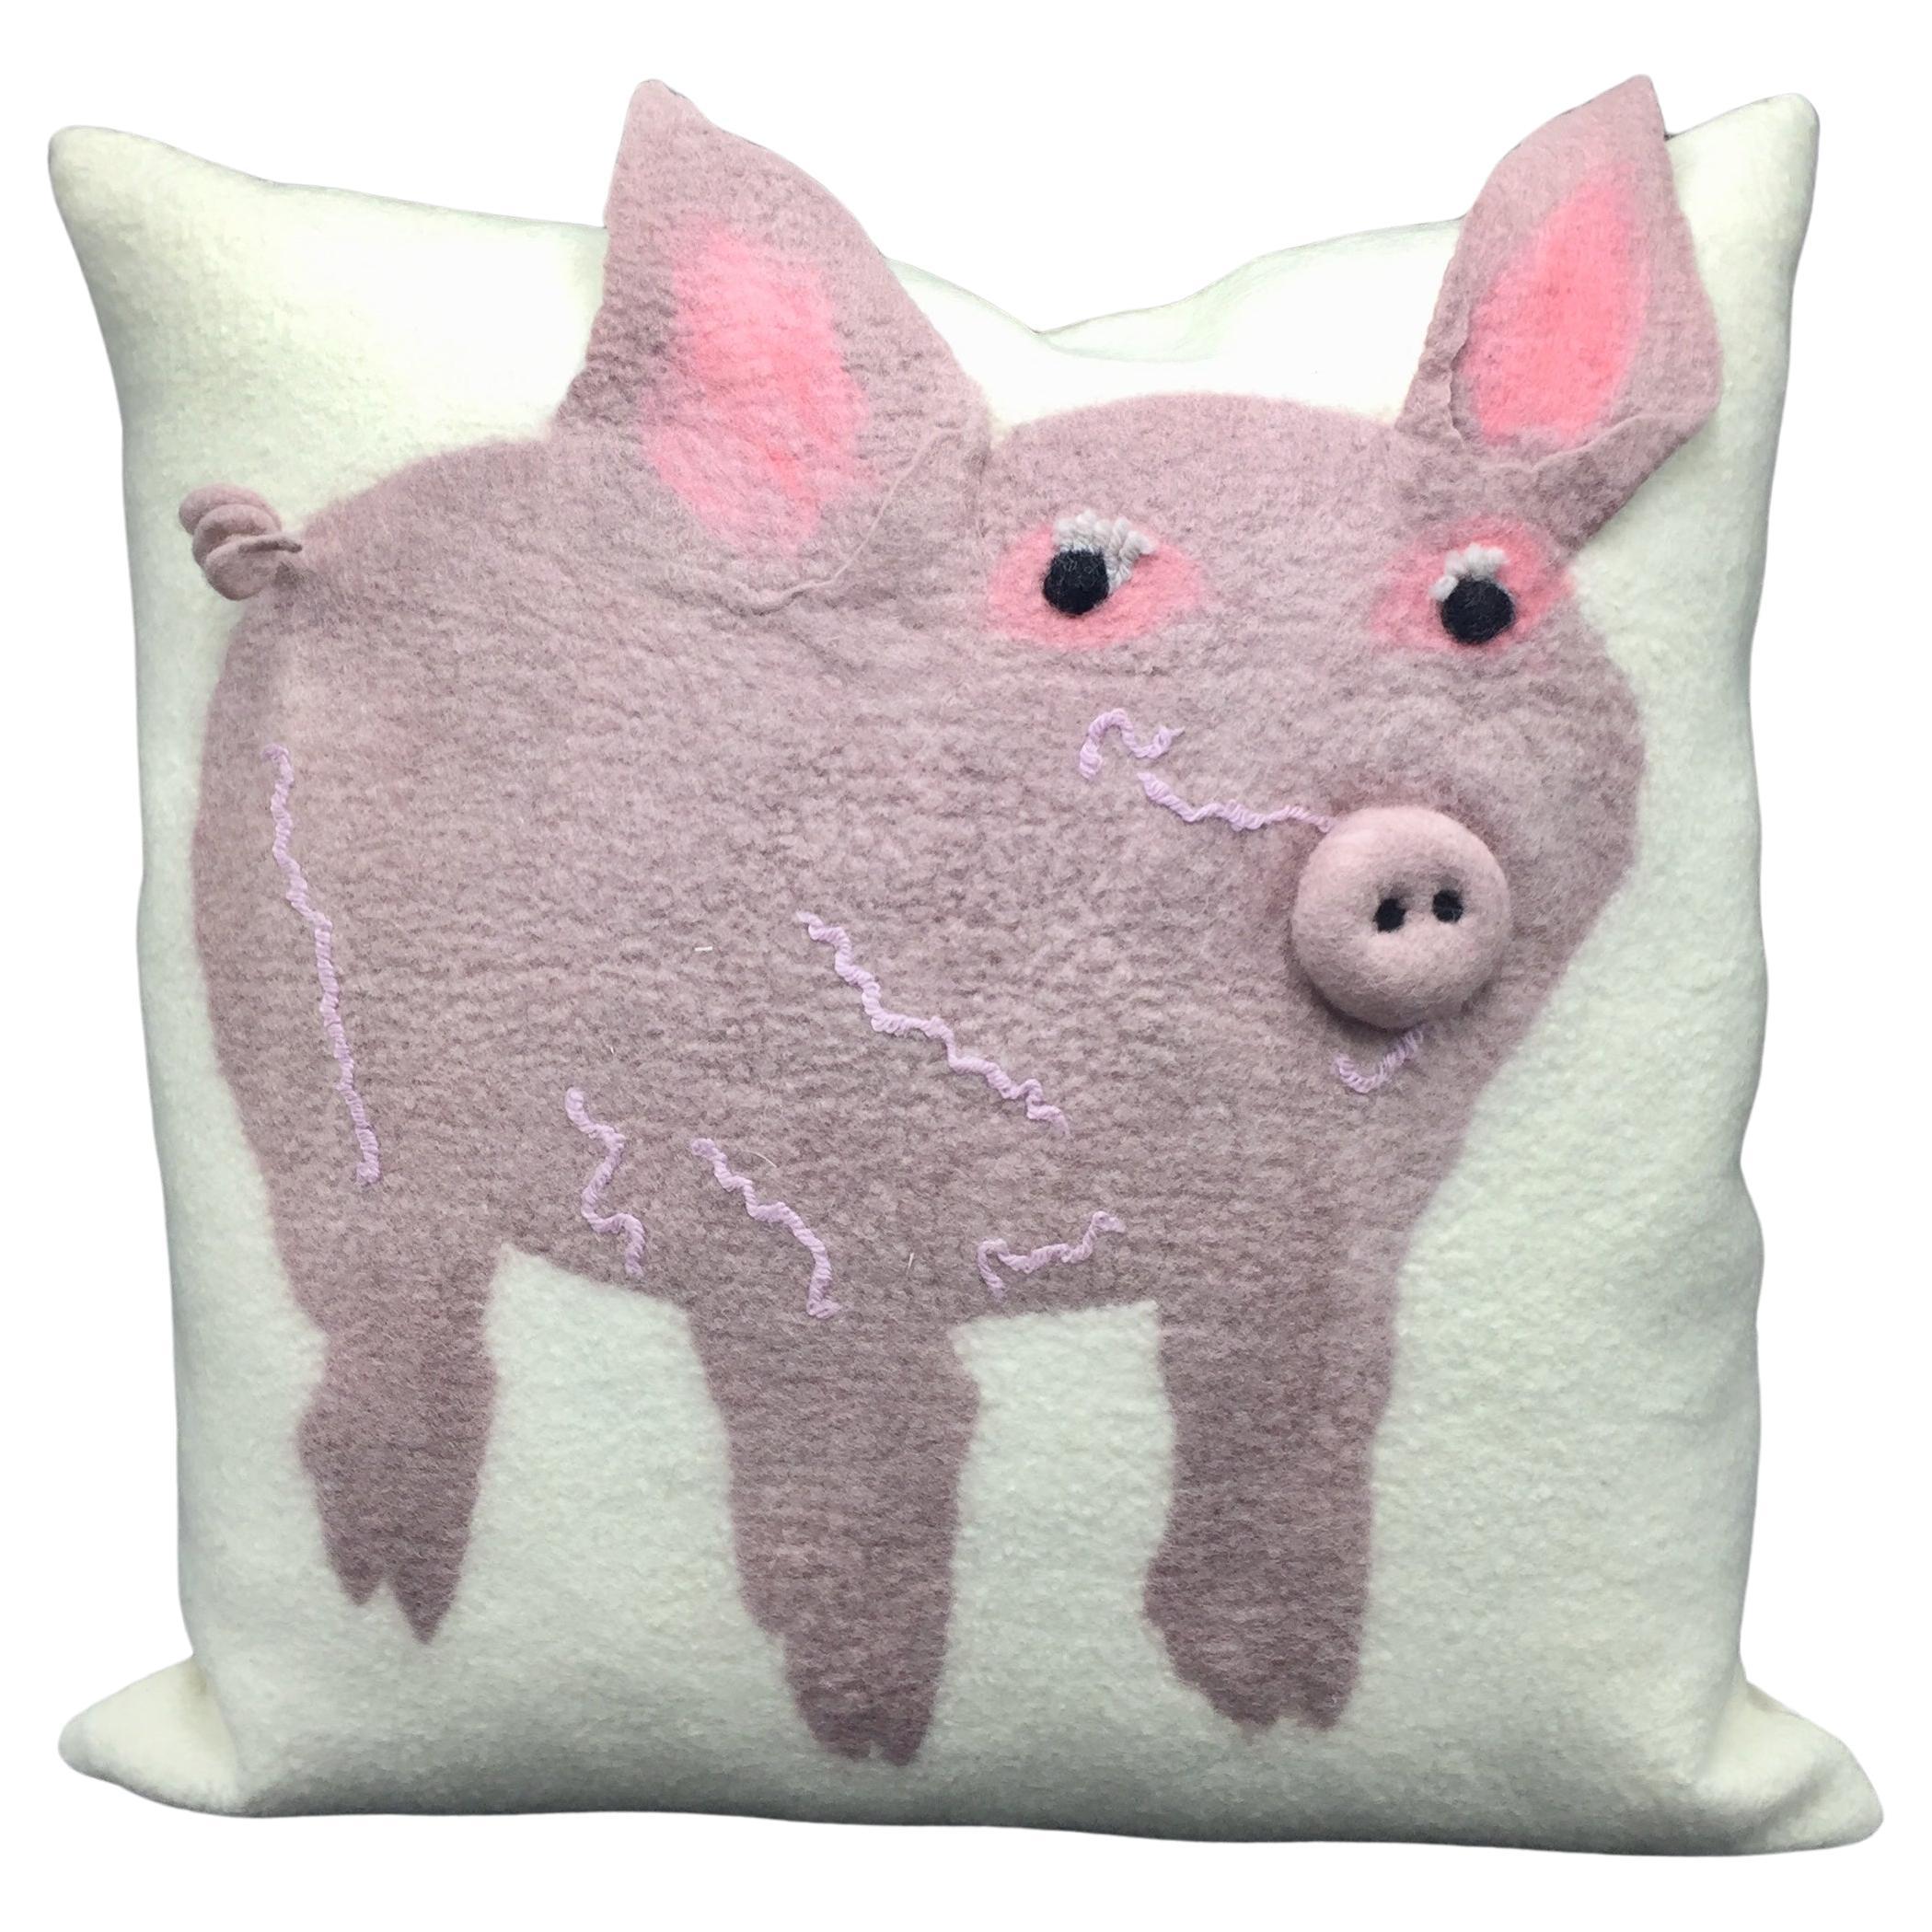 Contemporary Handmade Wool Pillow with Pink Pig Character  For Sale